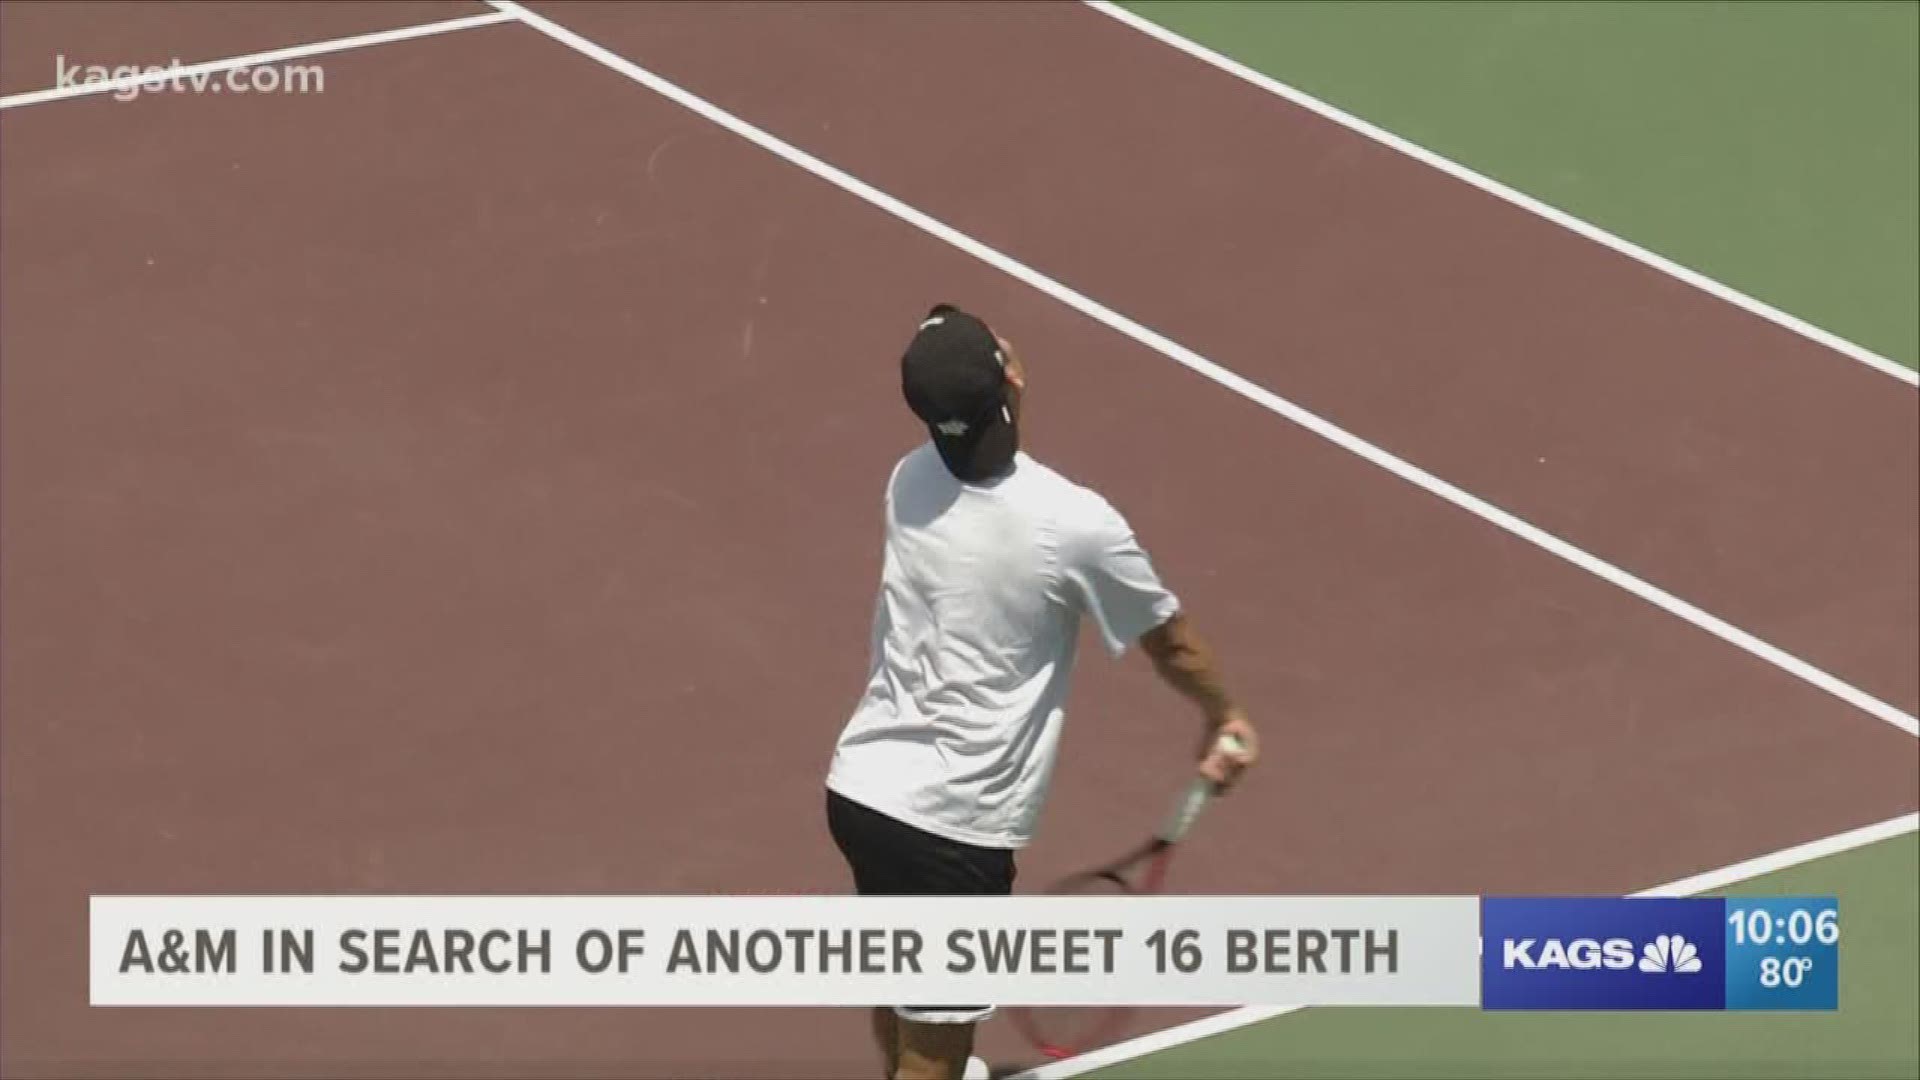 Texas A&M men's tennis defeated Baylor 4-1 in the second round of the NCAA Tournament to advance to the Sweet 16.